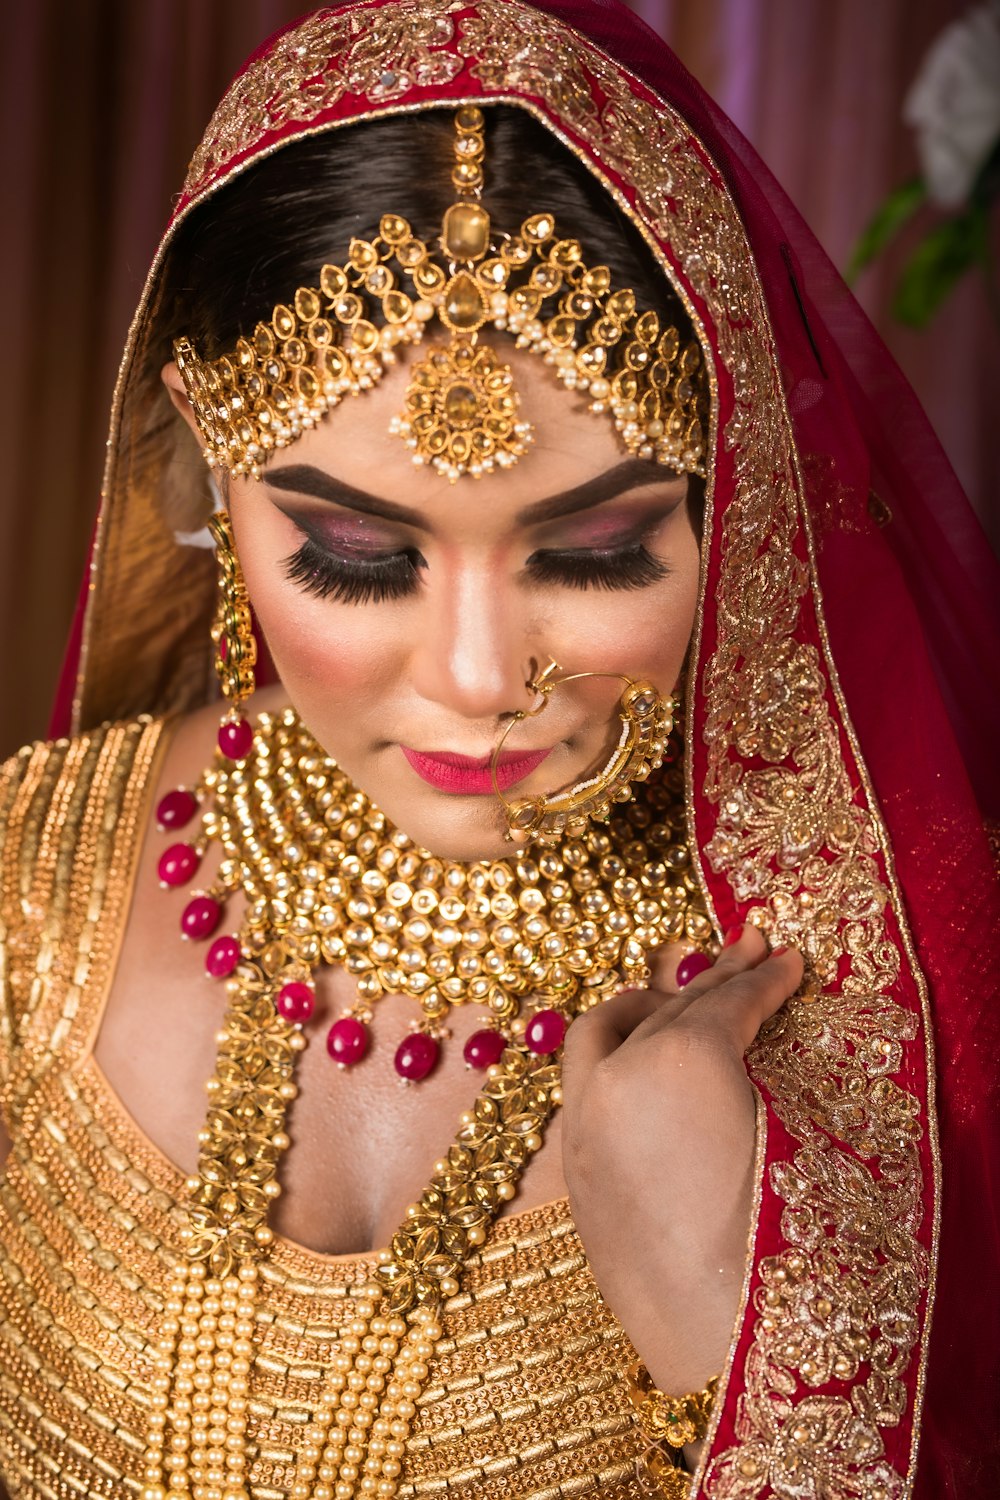 a woman wearing a gold and red bridal outfit